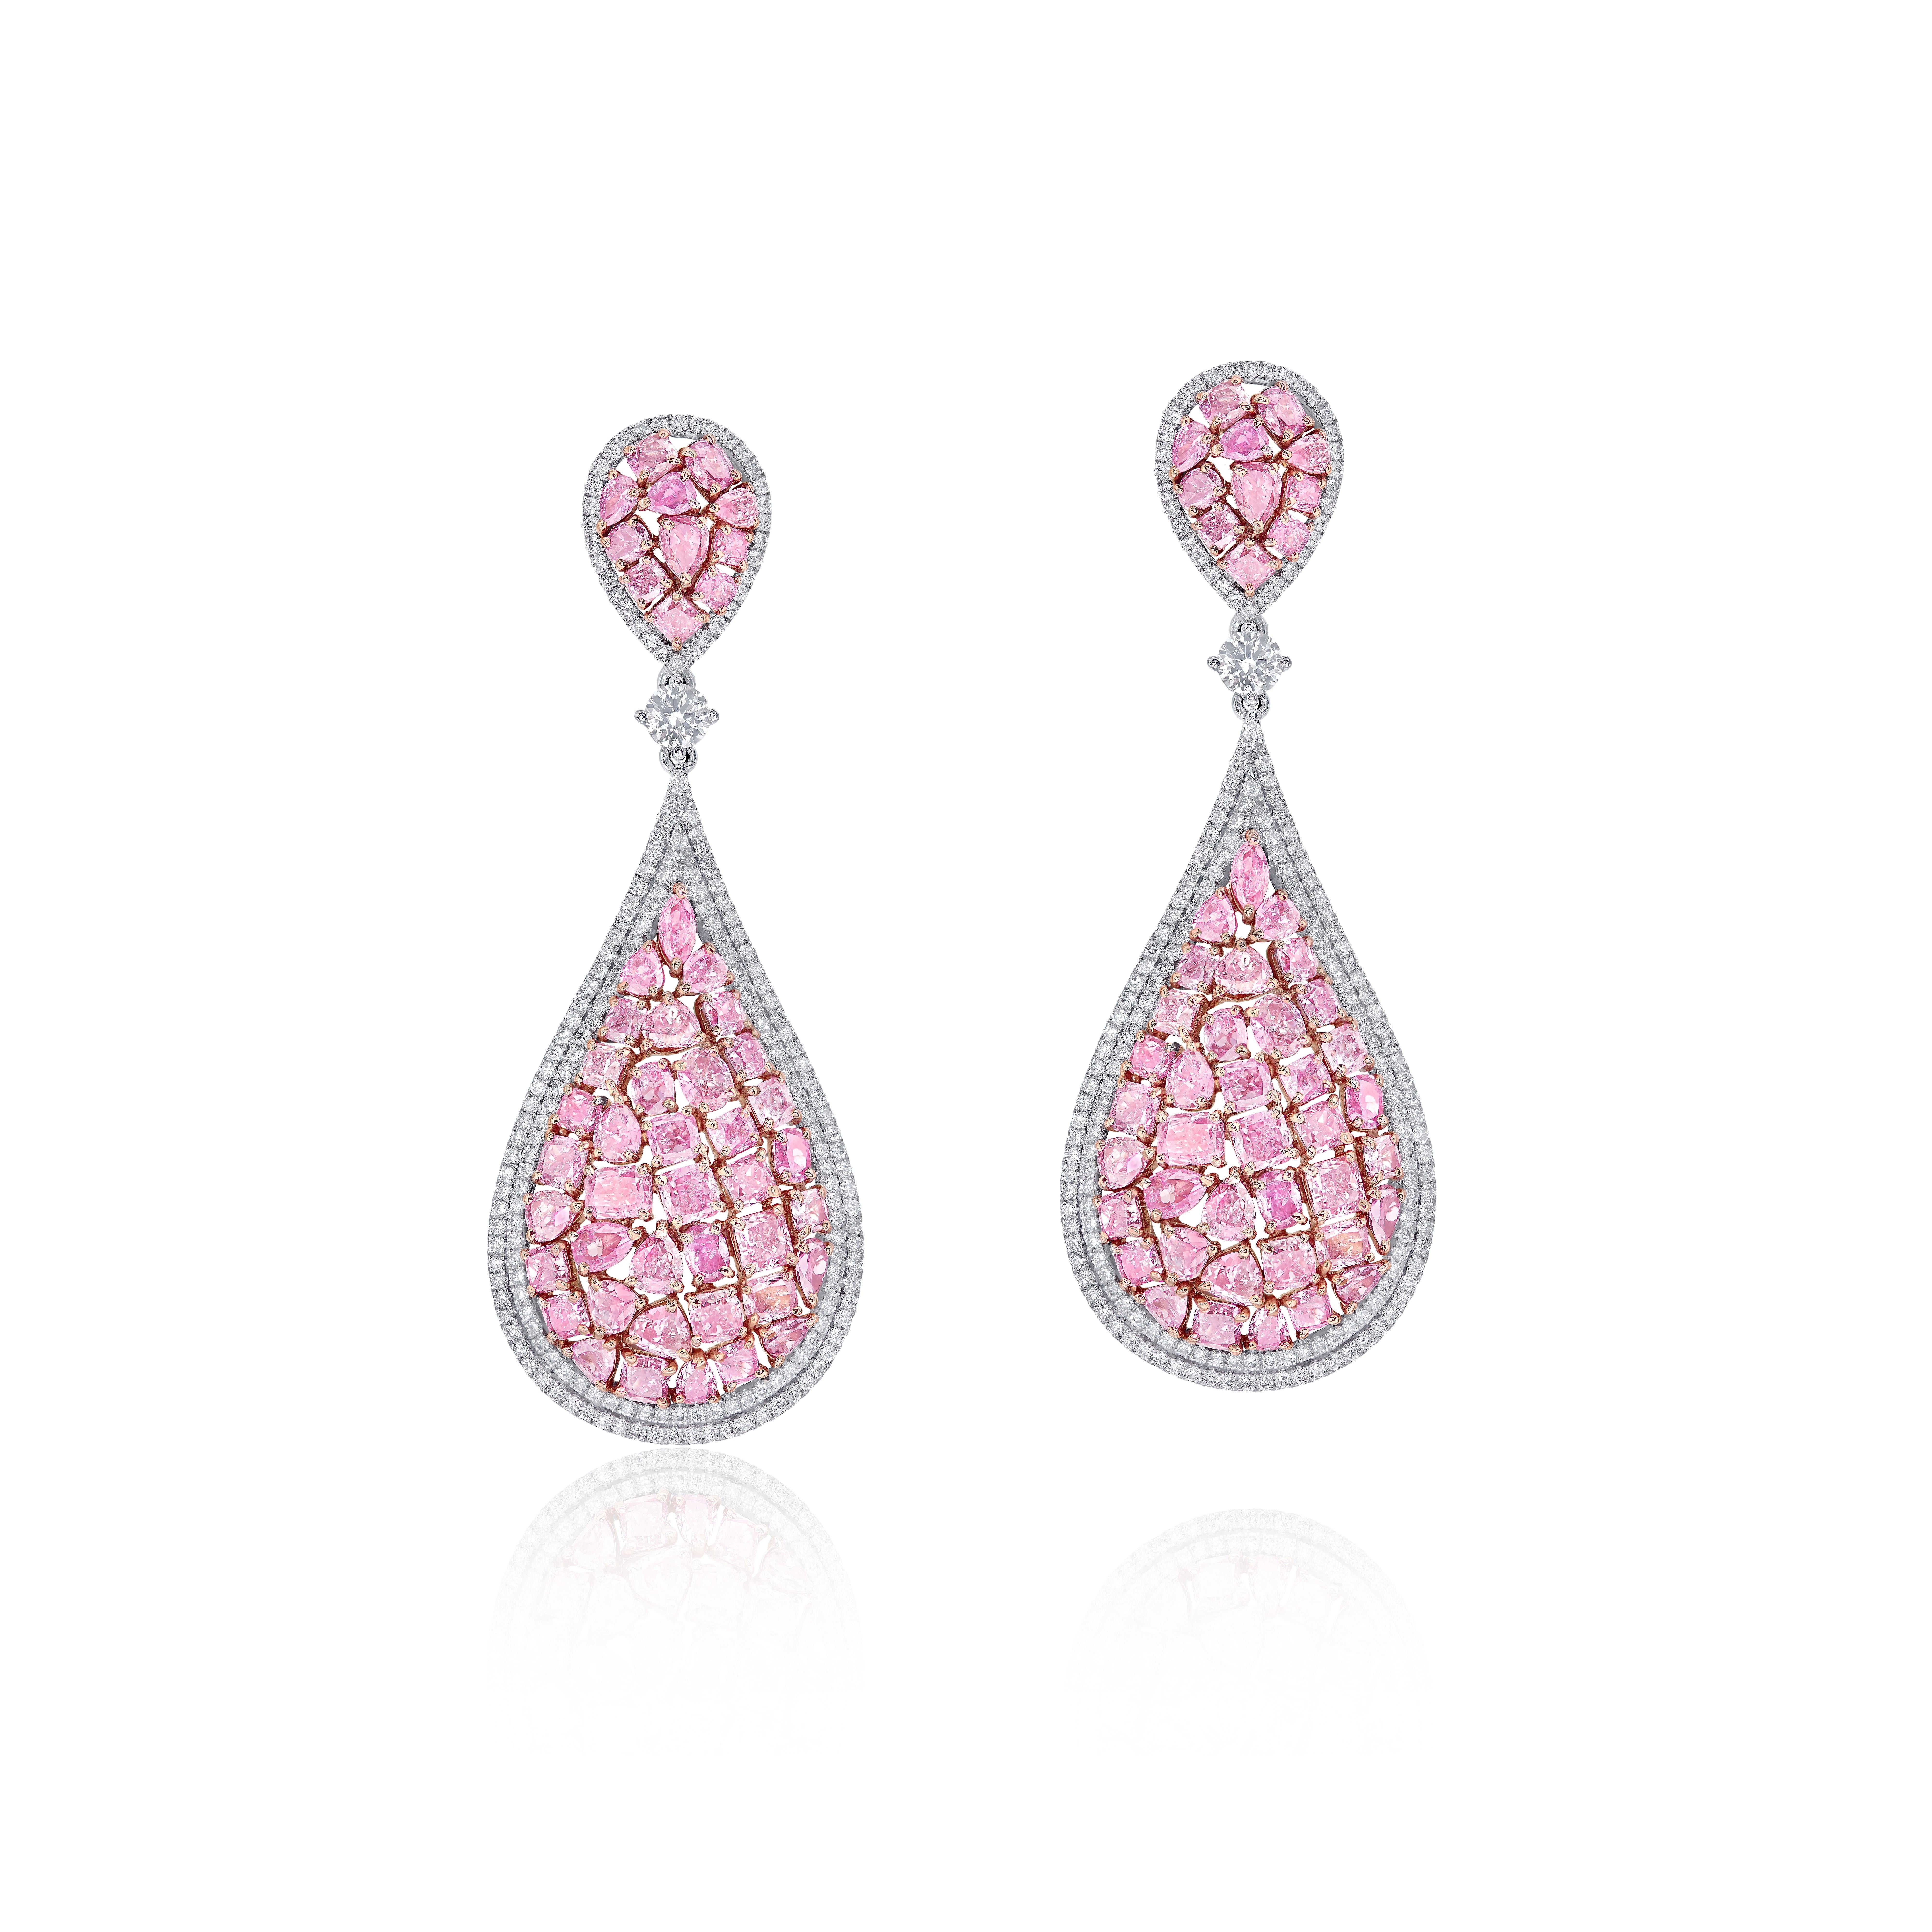 From the vault at Emilio Jewelry, located on New York's iconic Fifth Avenue,
A truly difficult piece to make, we spent over 1 year accumulating matching natural pink diamonds over different shapes, to create this one of a kind earring. 
Weight: pink